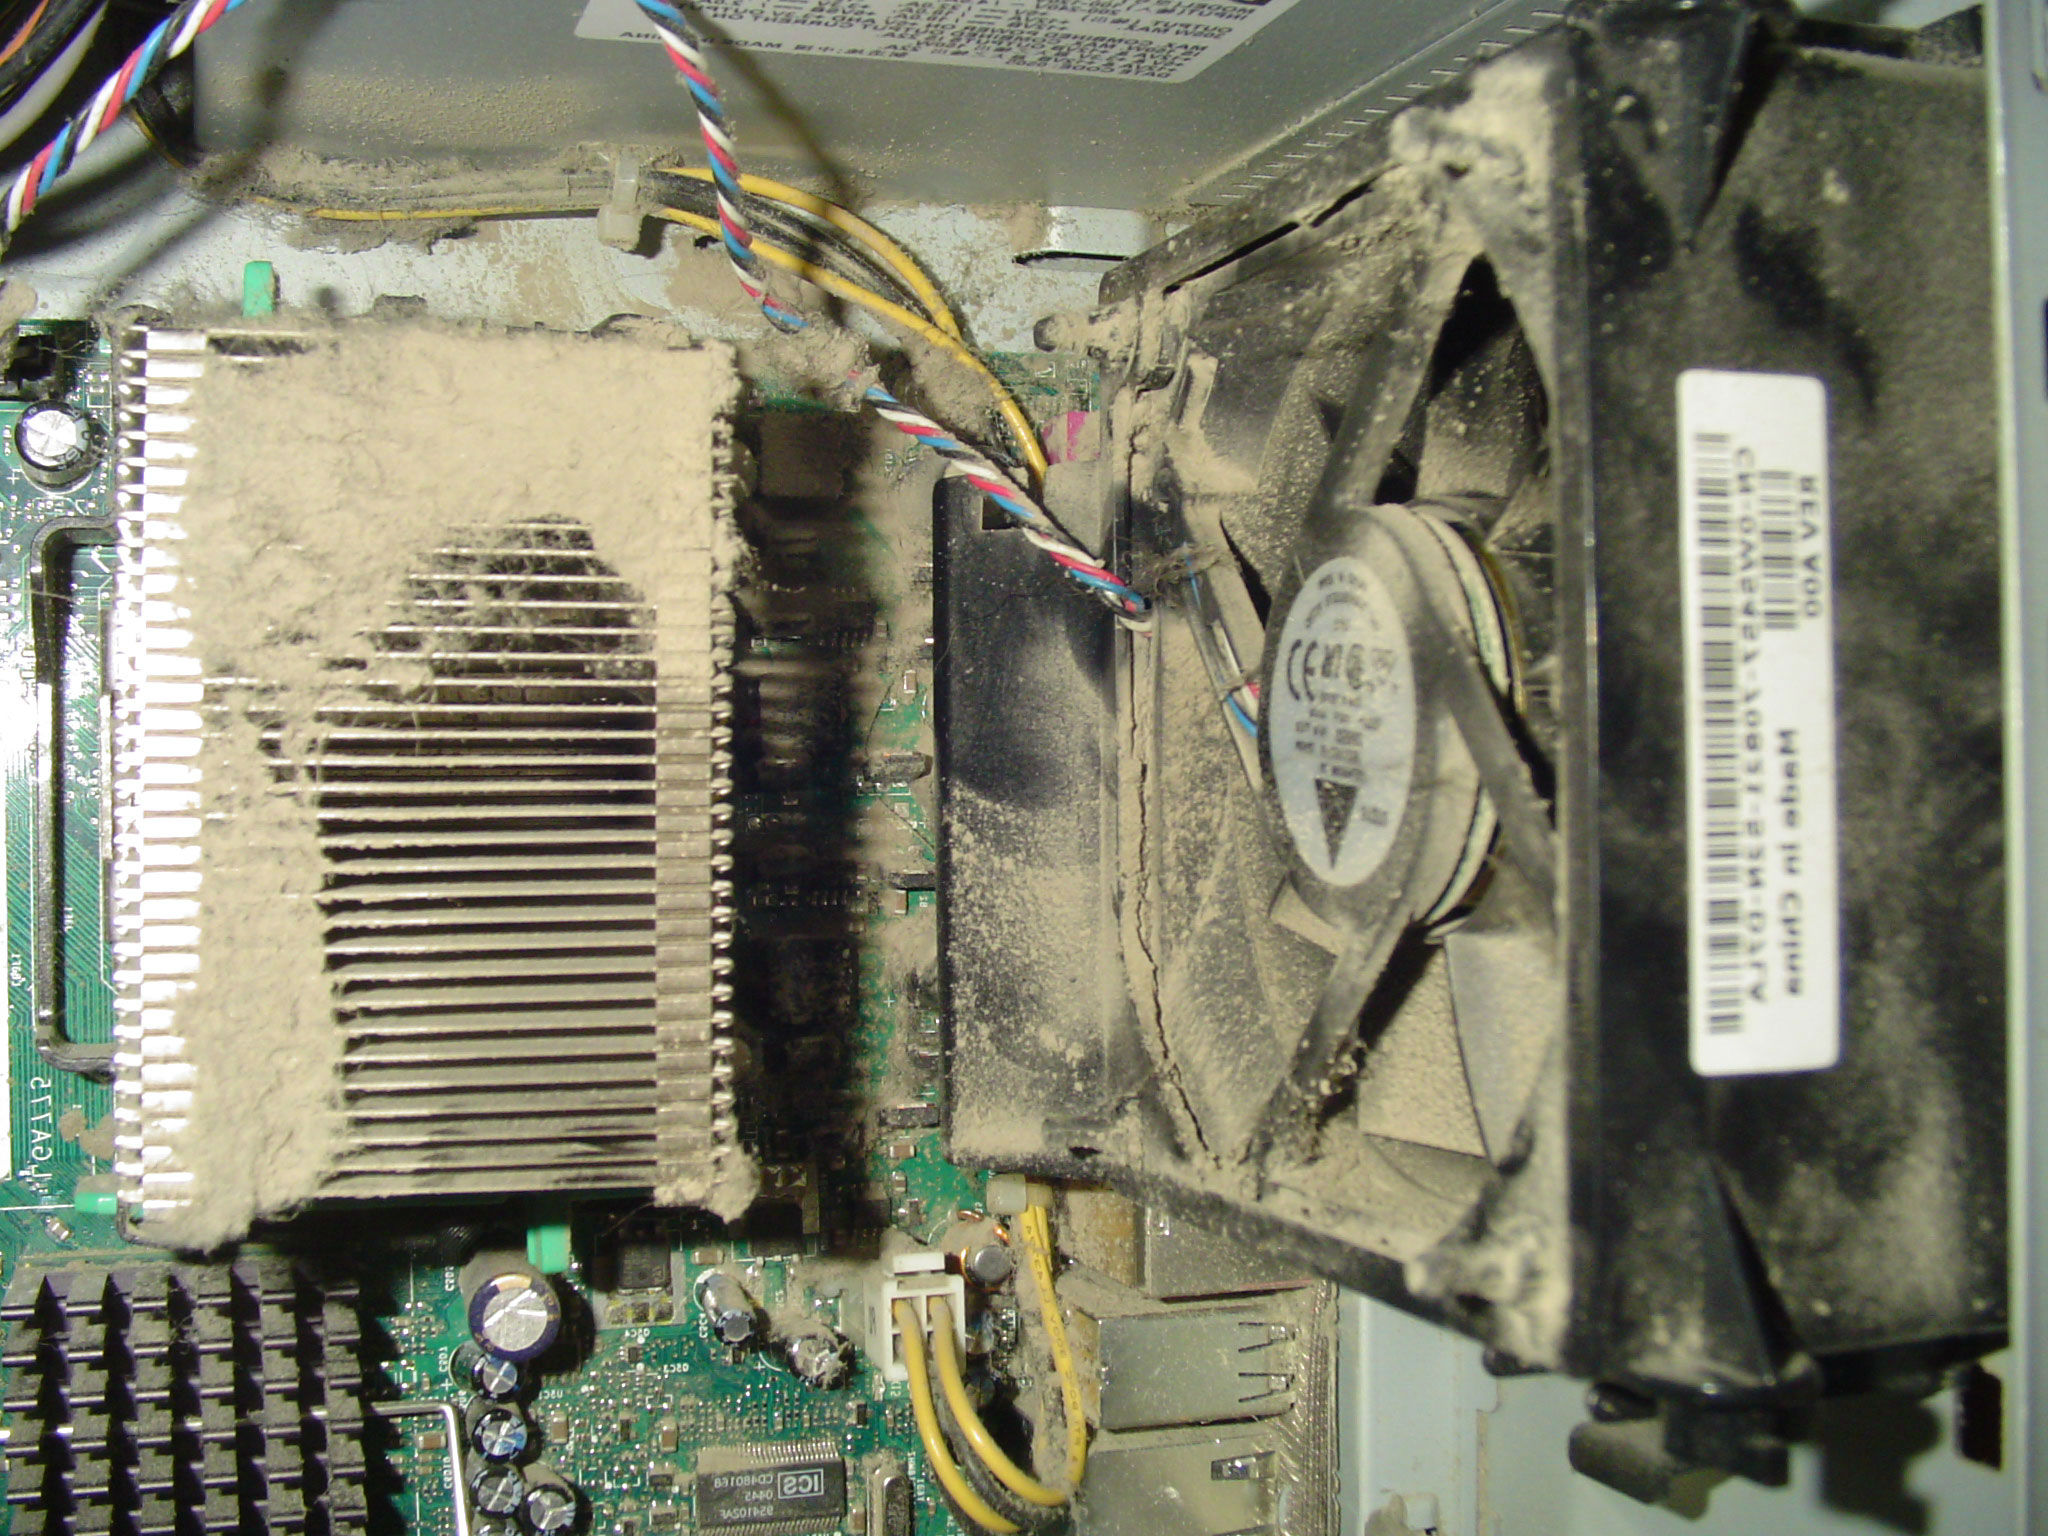 Cleaning your dusty computer